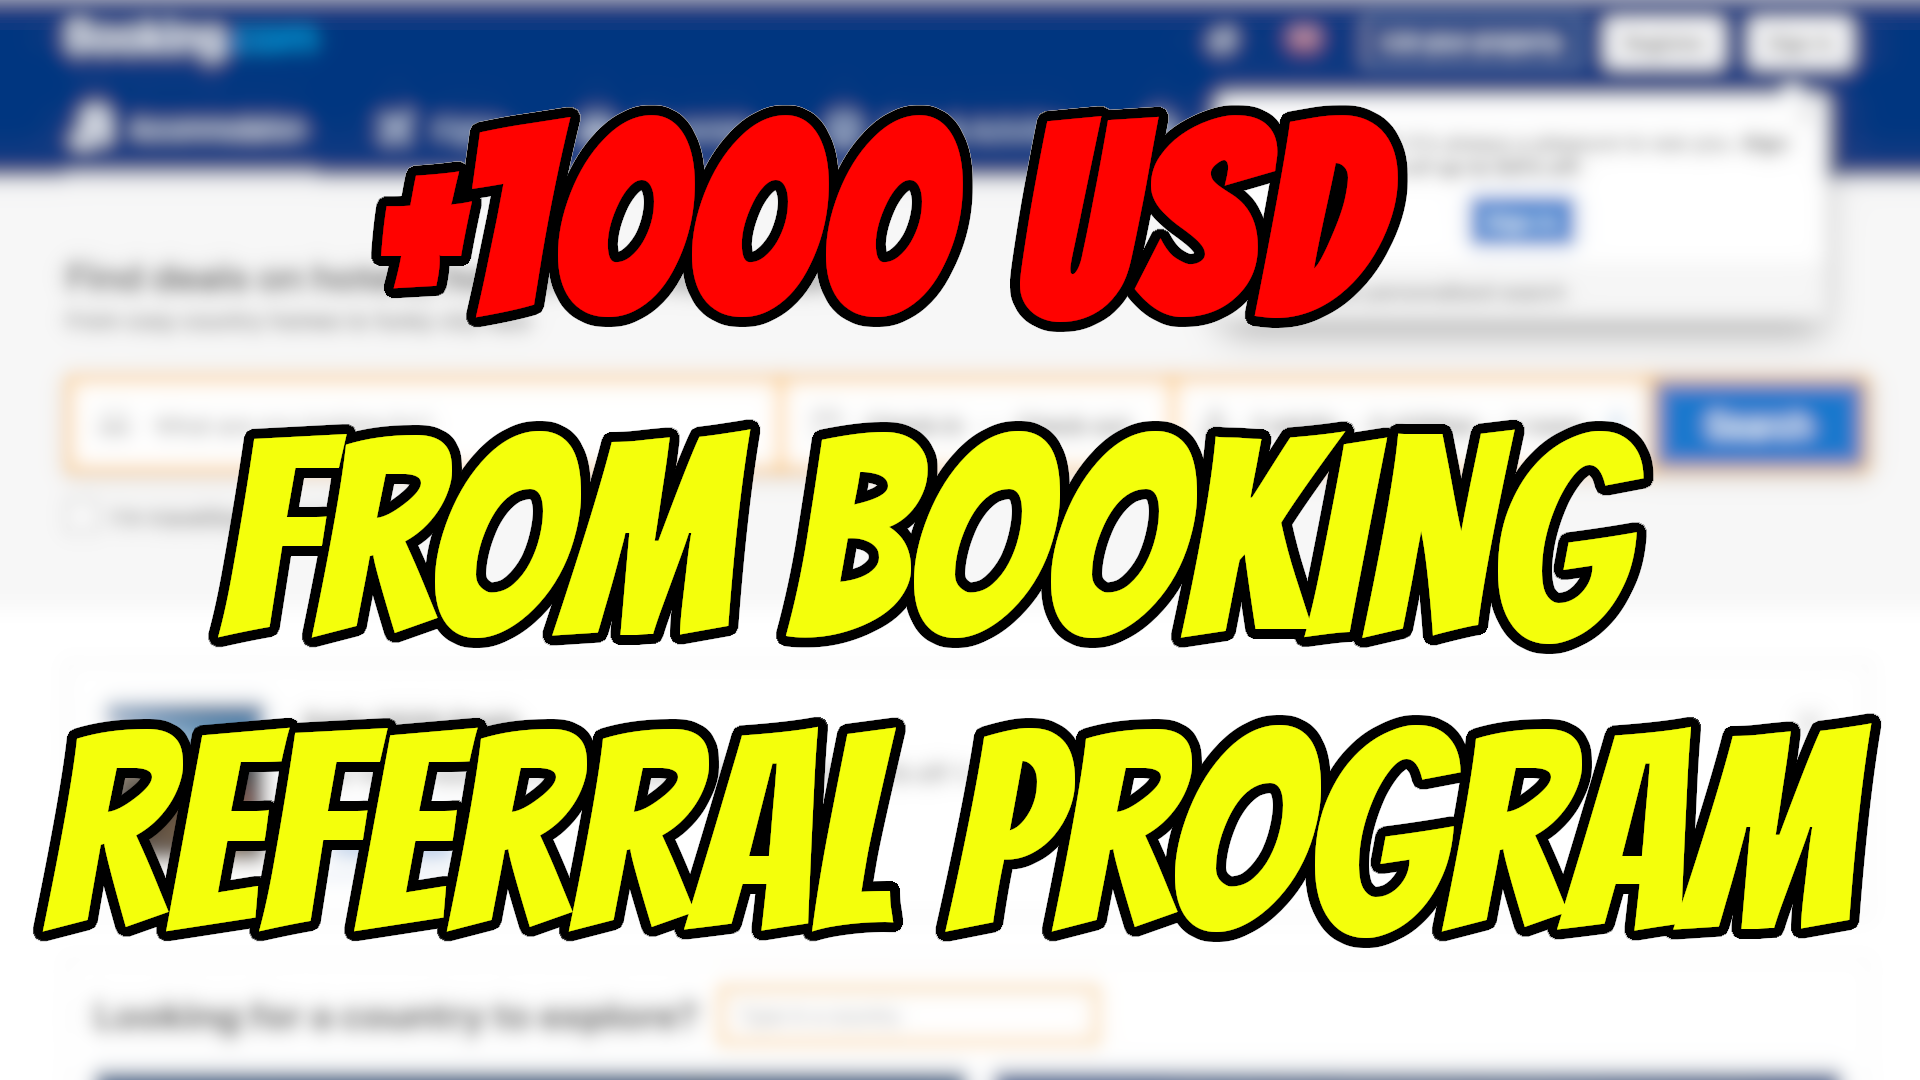 How to get $1000 from Booking Referral Program